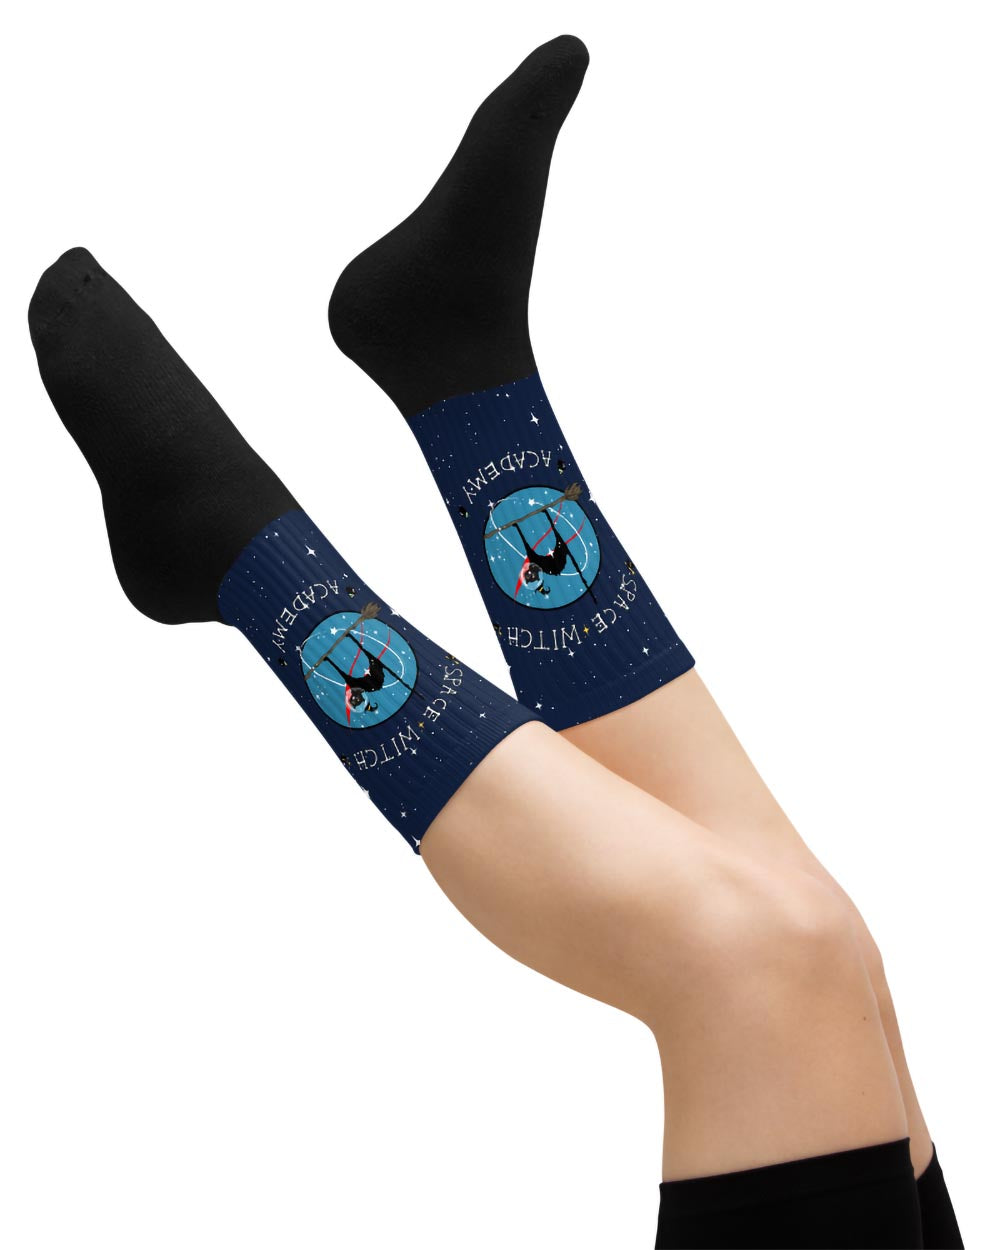 Space Witch Academy Socks - Vegan Unisex Goth Spooky Socks Witchy Alt Style Cool Gothic Gifts for Him and Her